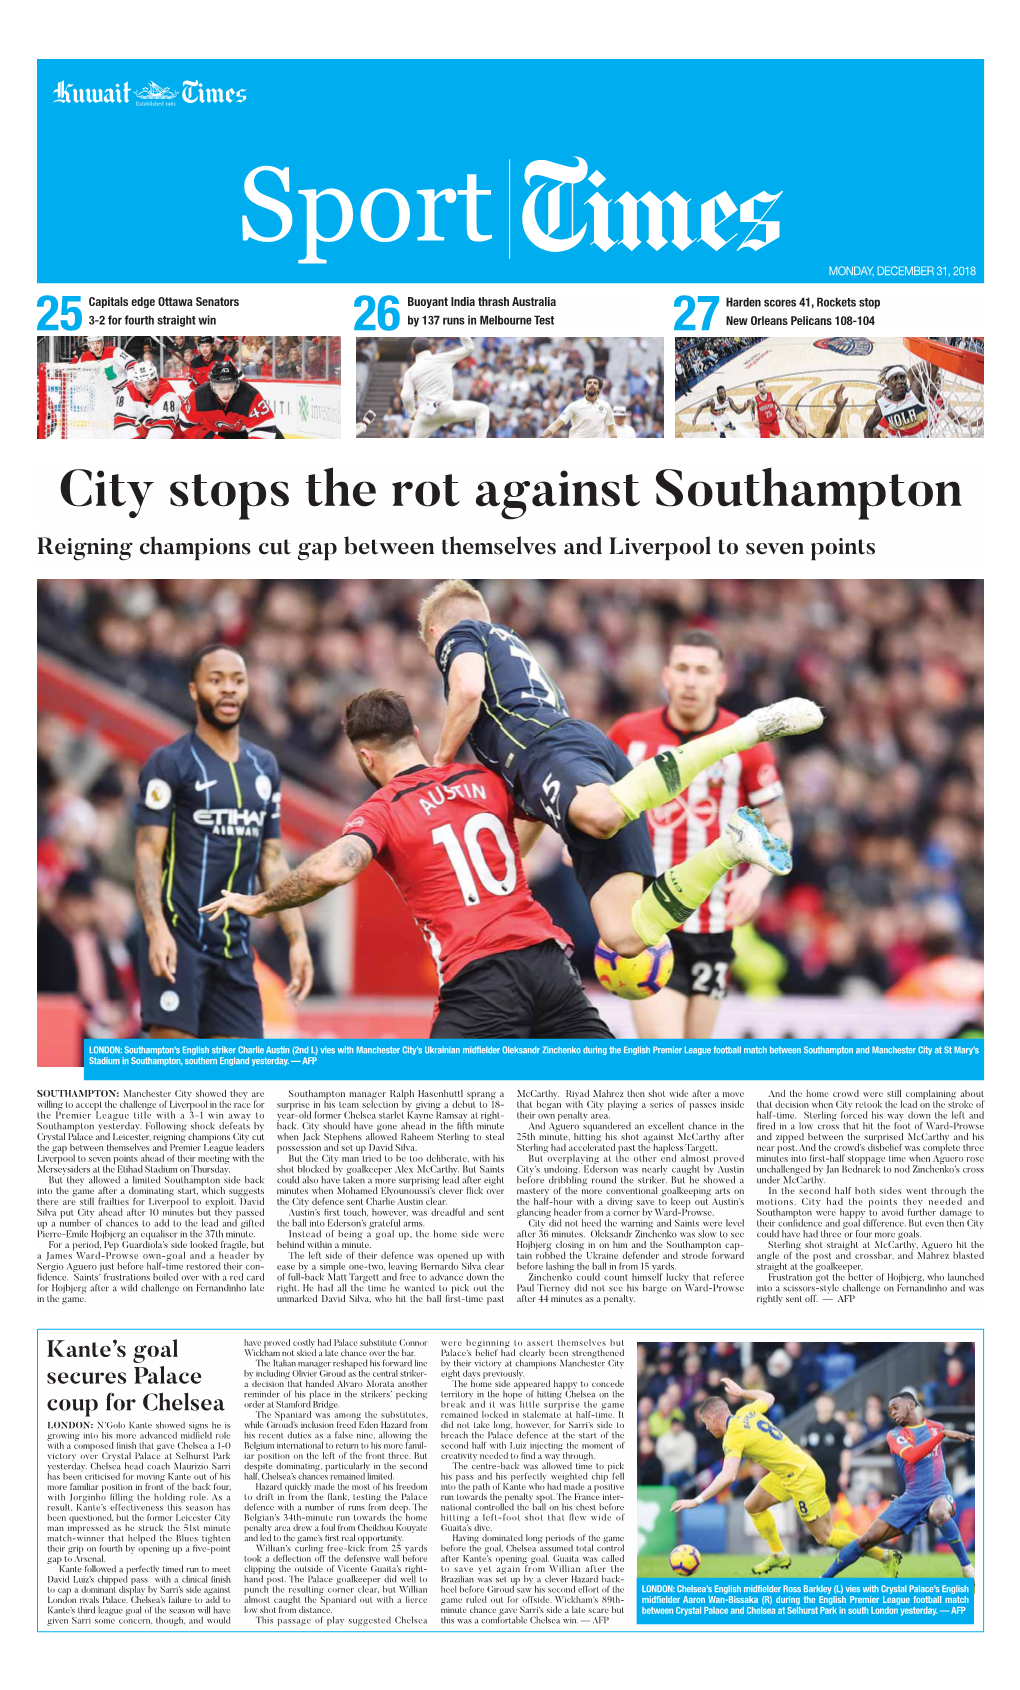 City Stops the Rot Against Southampton Reigning Champions Cut Gap Between Themselves and Liverpool to Seven Points